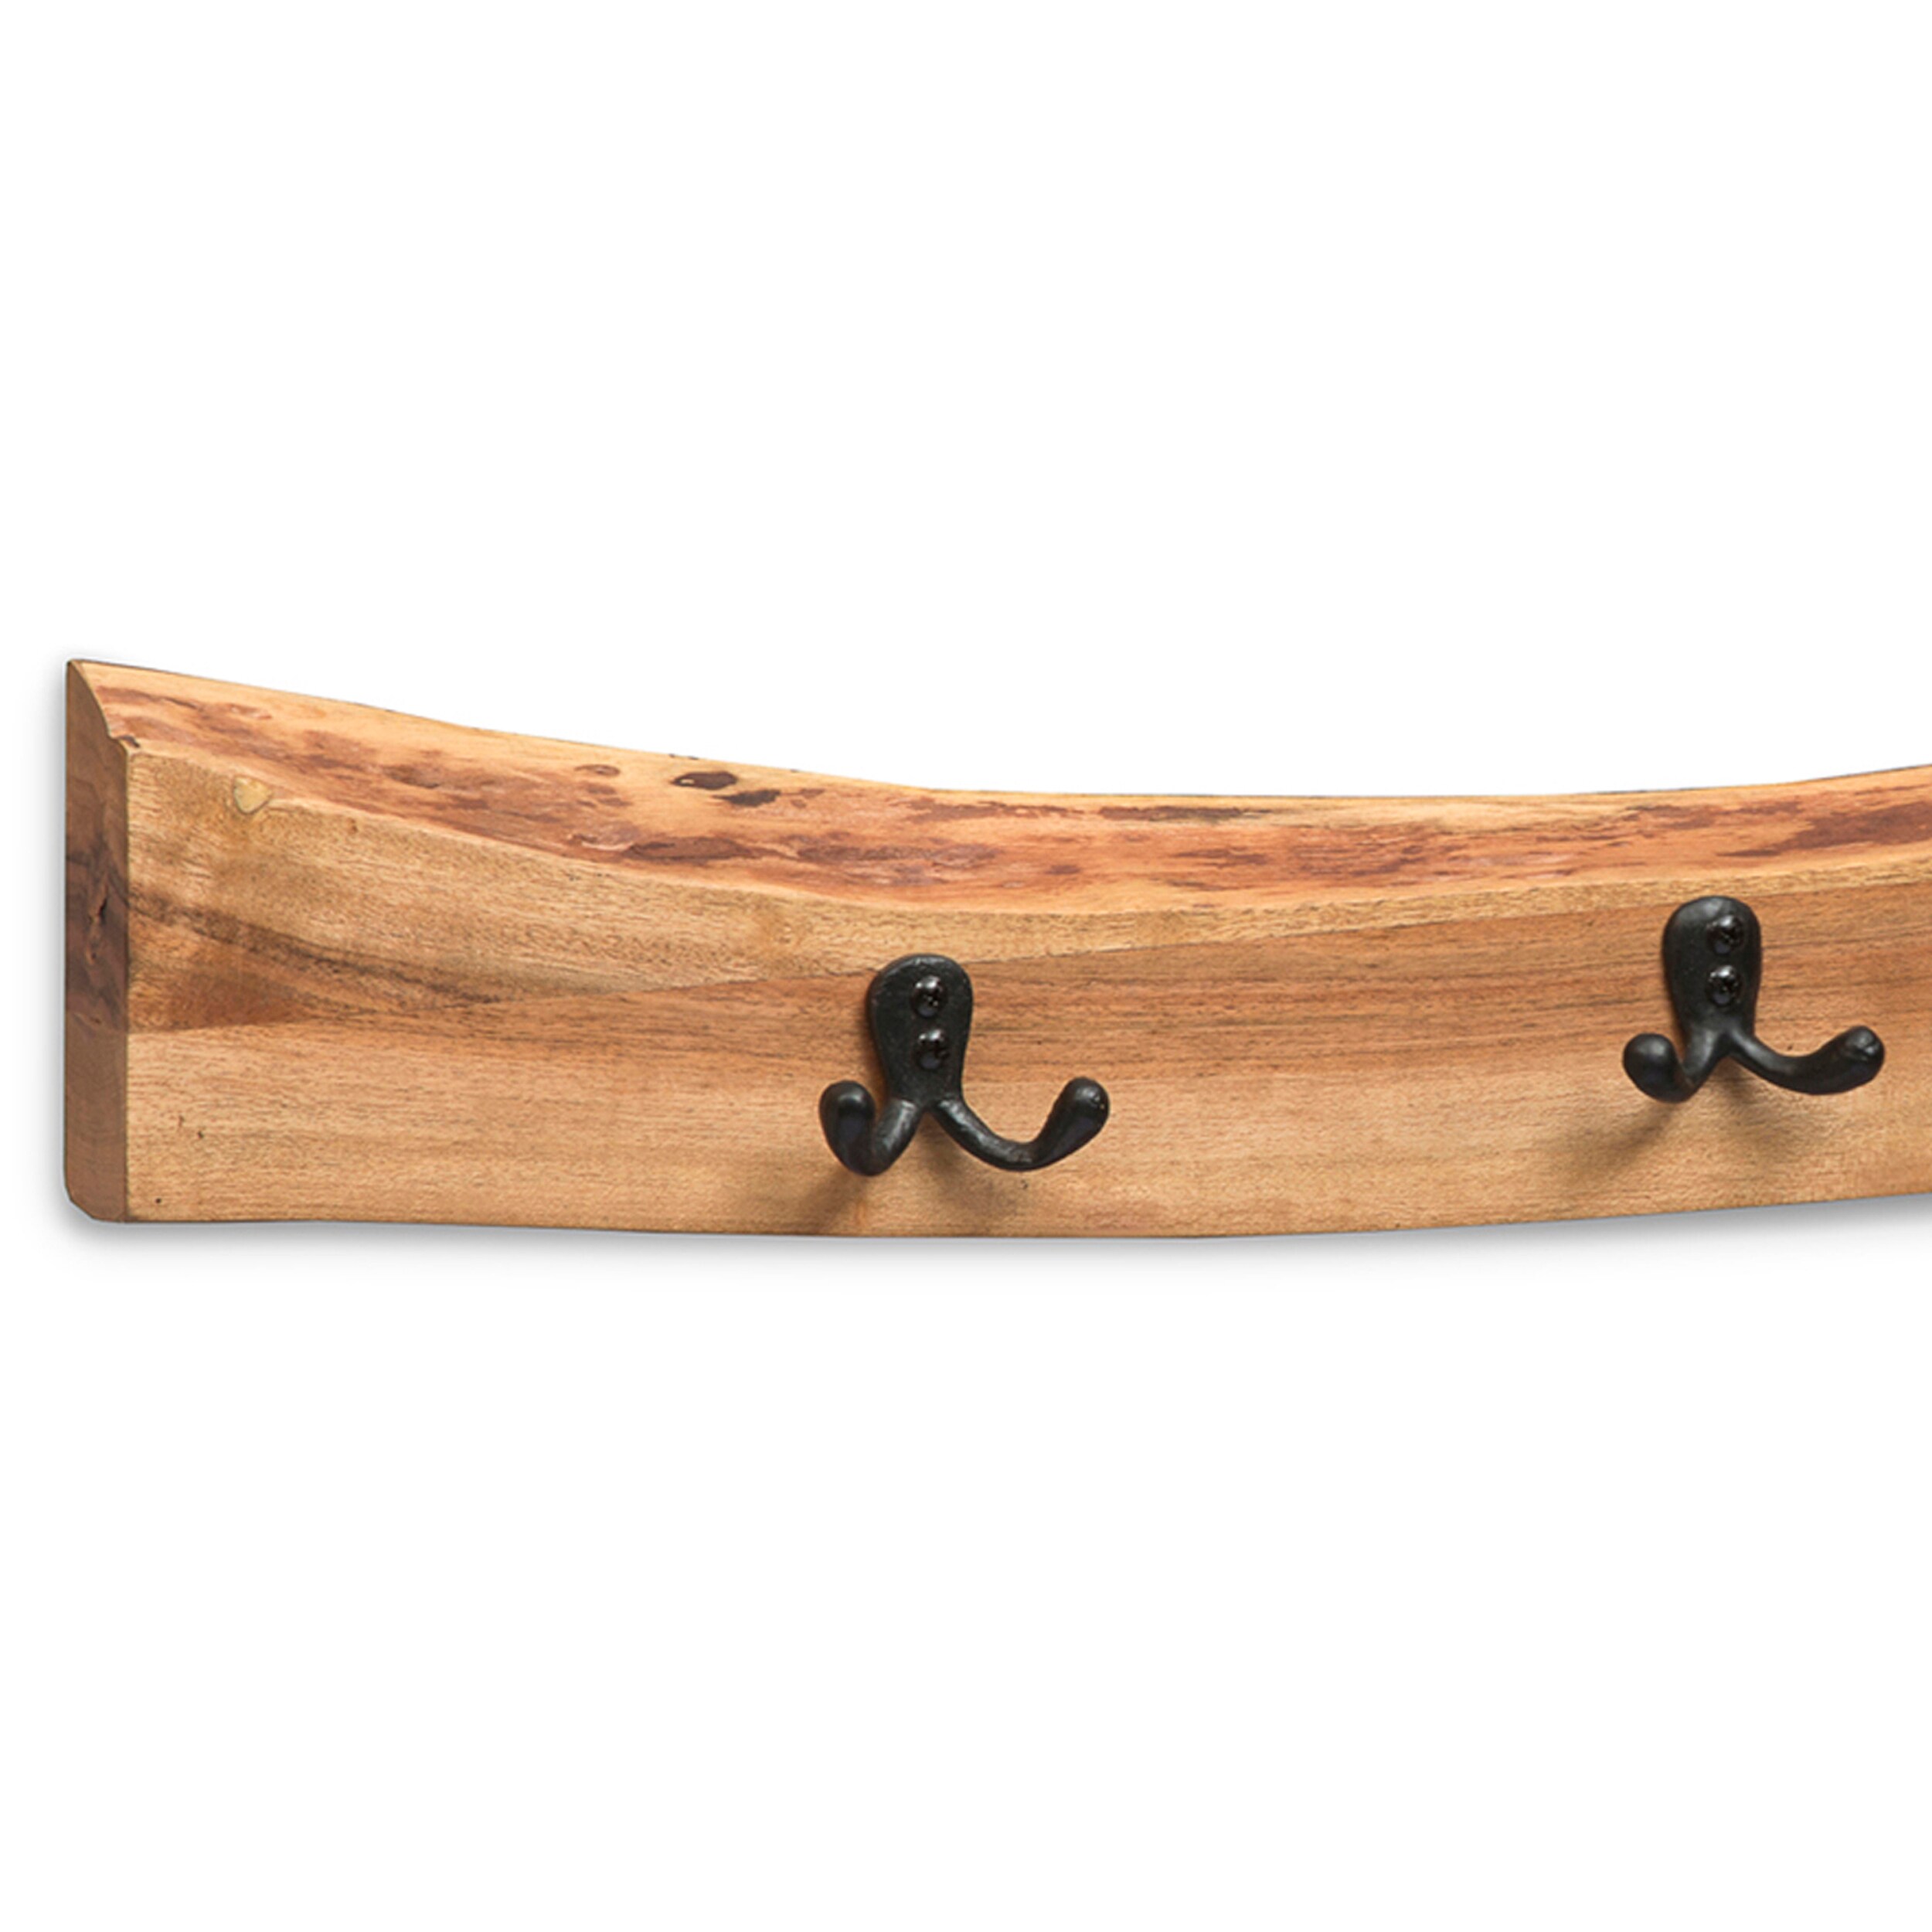 Alaterre Furniture Hairpin Natural Live Edge 48 Bench with Coat Hook Shelf  Set, 1 - Baker's